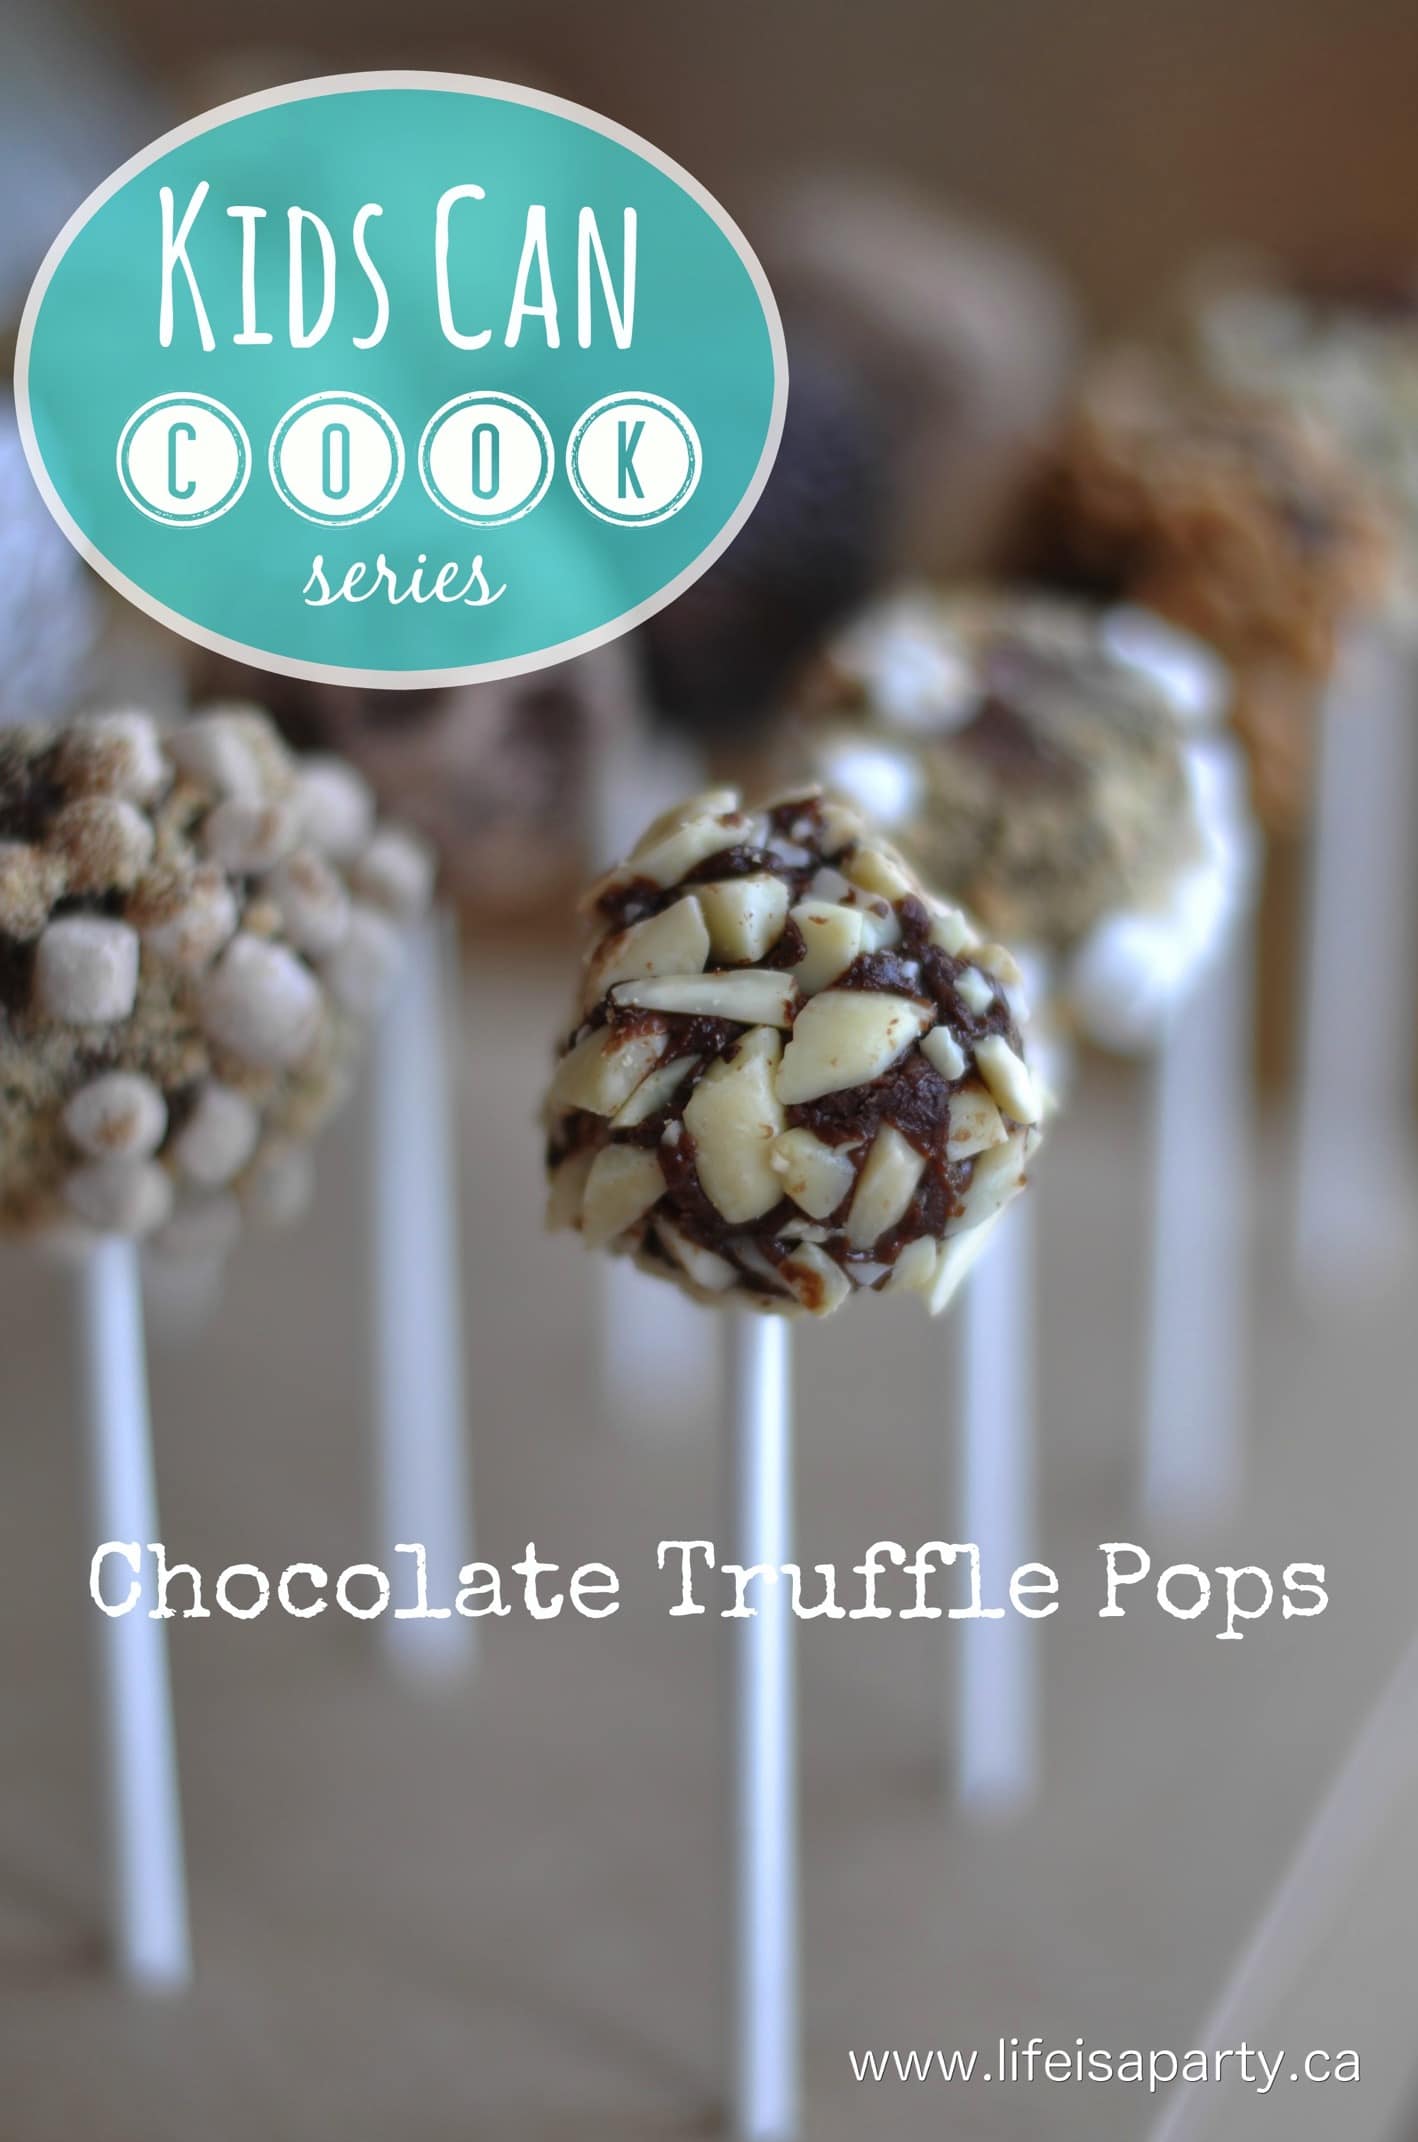 Chocolate Truffle Pops -An easy and delicious recipe for kids, simple enough for them to do mostly on their own and foolproof